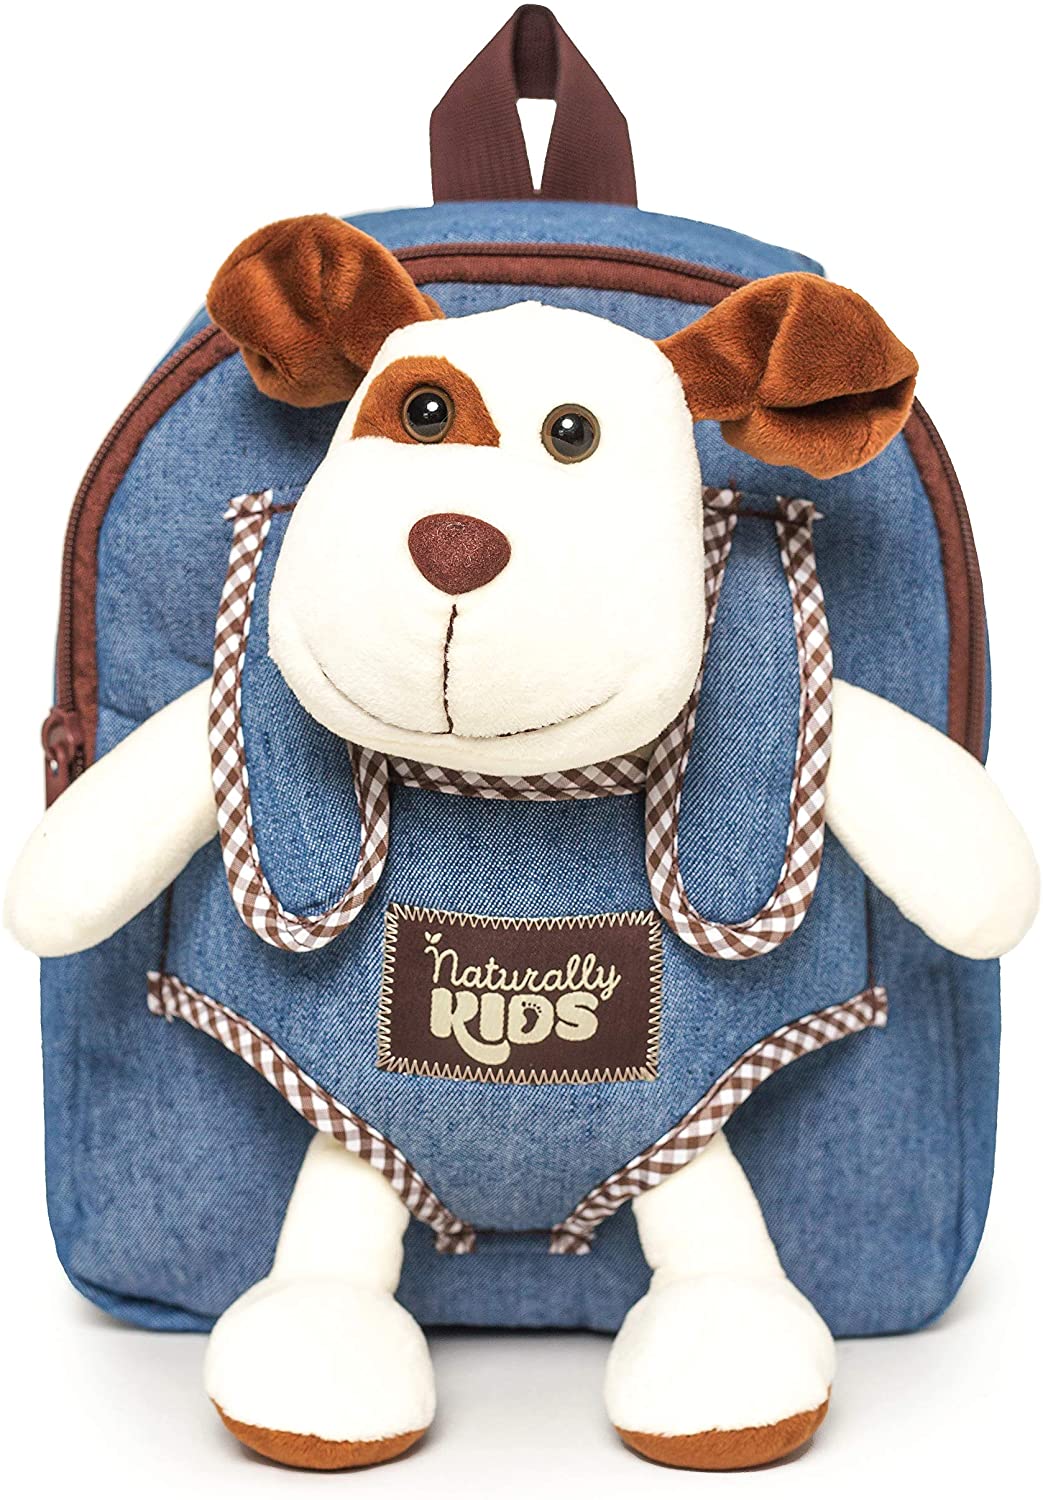 Naturally KIDS Small Backpack w Stuffed Animal Dog Plush Toy - Toddler Backpack for Boy Backpack for Kids - Toys for Kids Ages 3 4 5 6 7 Toys for 3 Year Old Boys Puppy Backpack - 4 Year Old Girl Gift - image 1 of 9